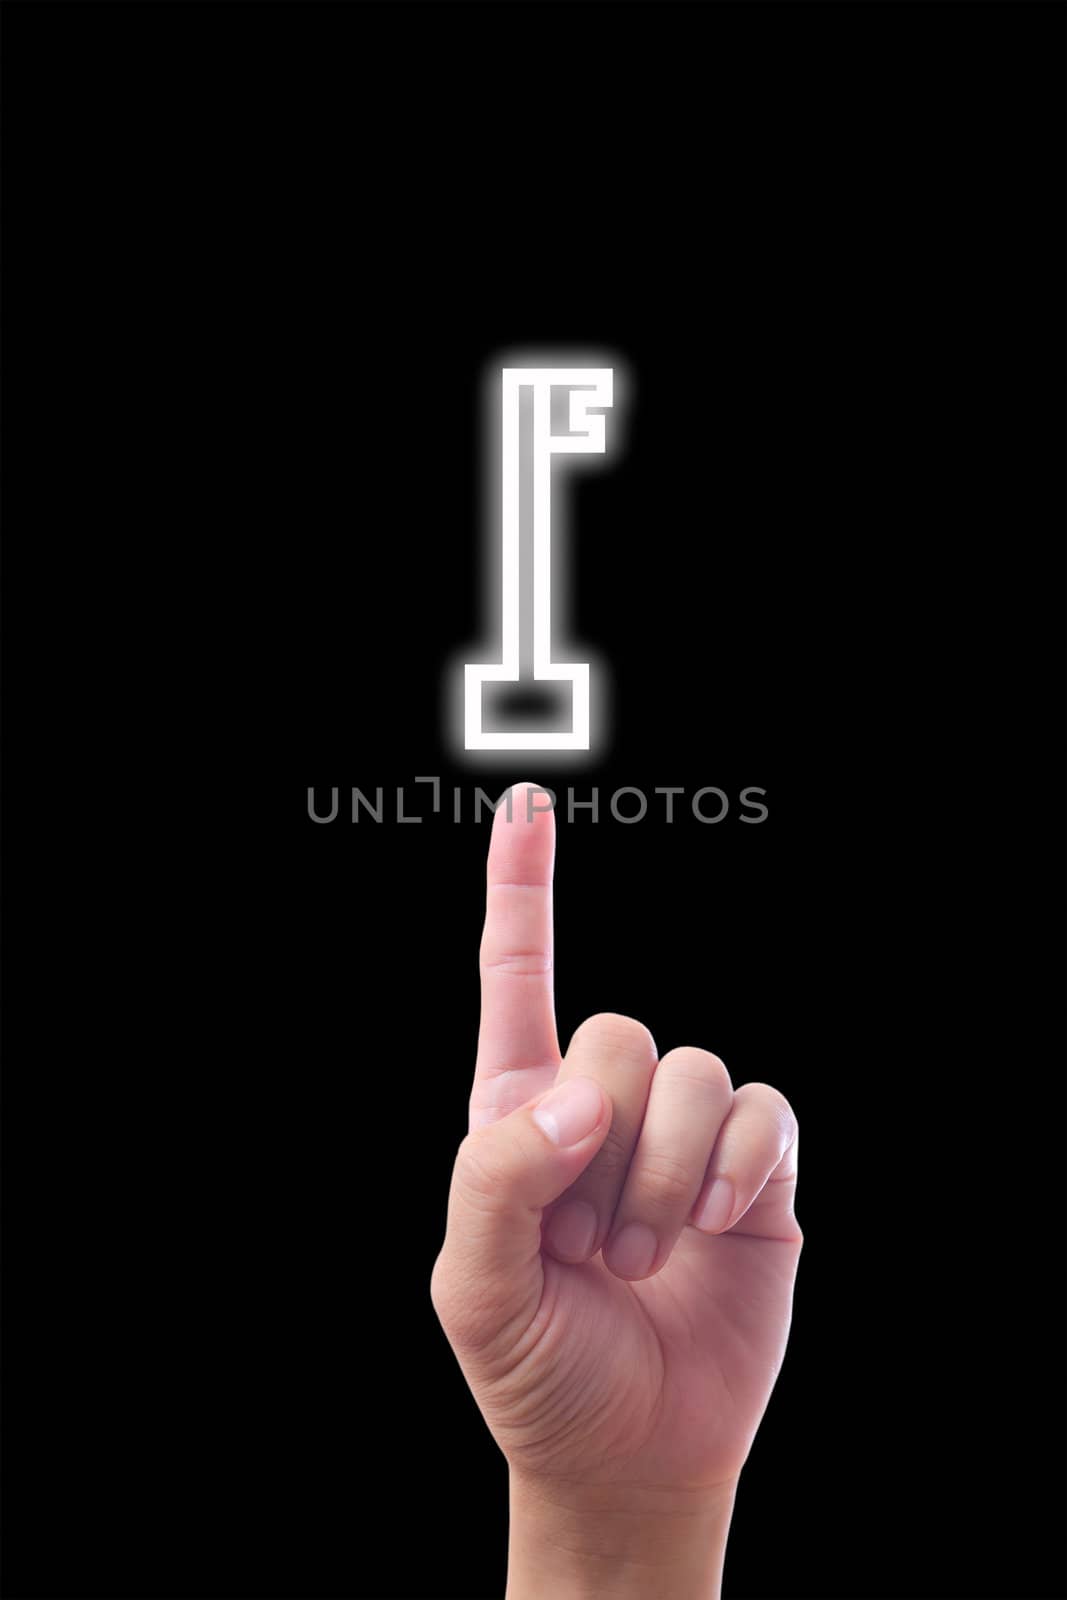 hand pointing to key icon by tungphoto